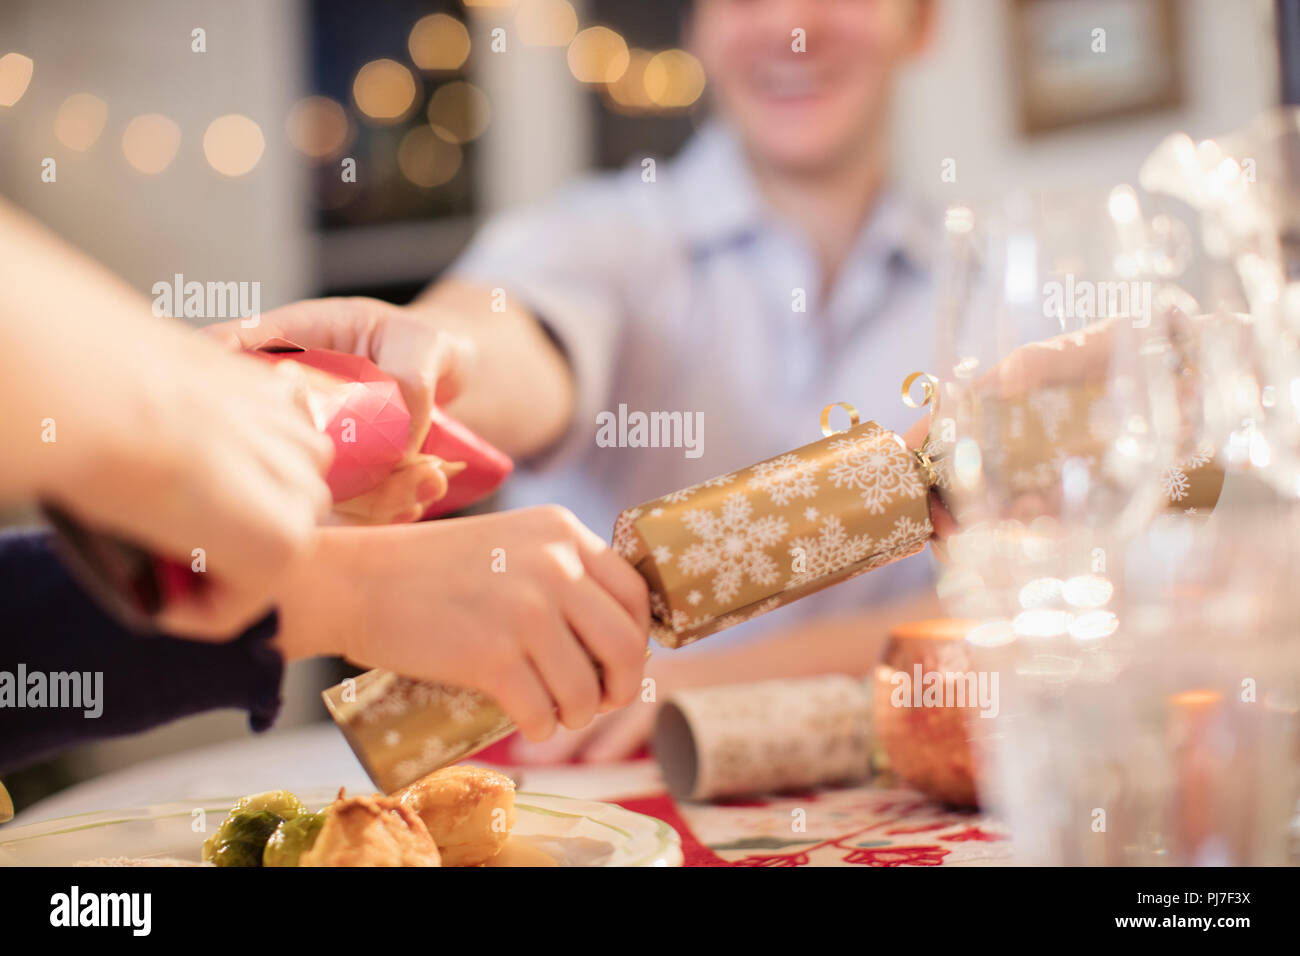 Family pulling Christmas crackers at dinner table Stock Photo